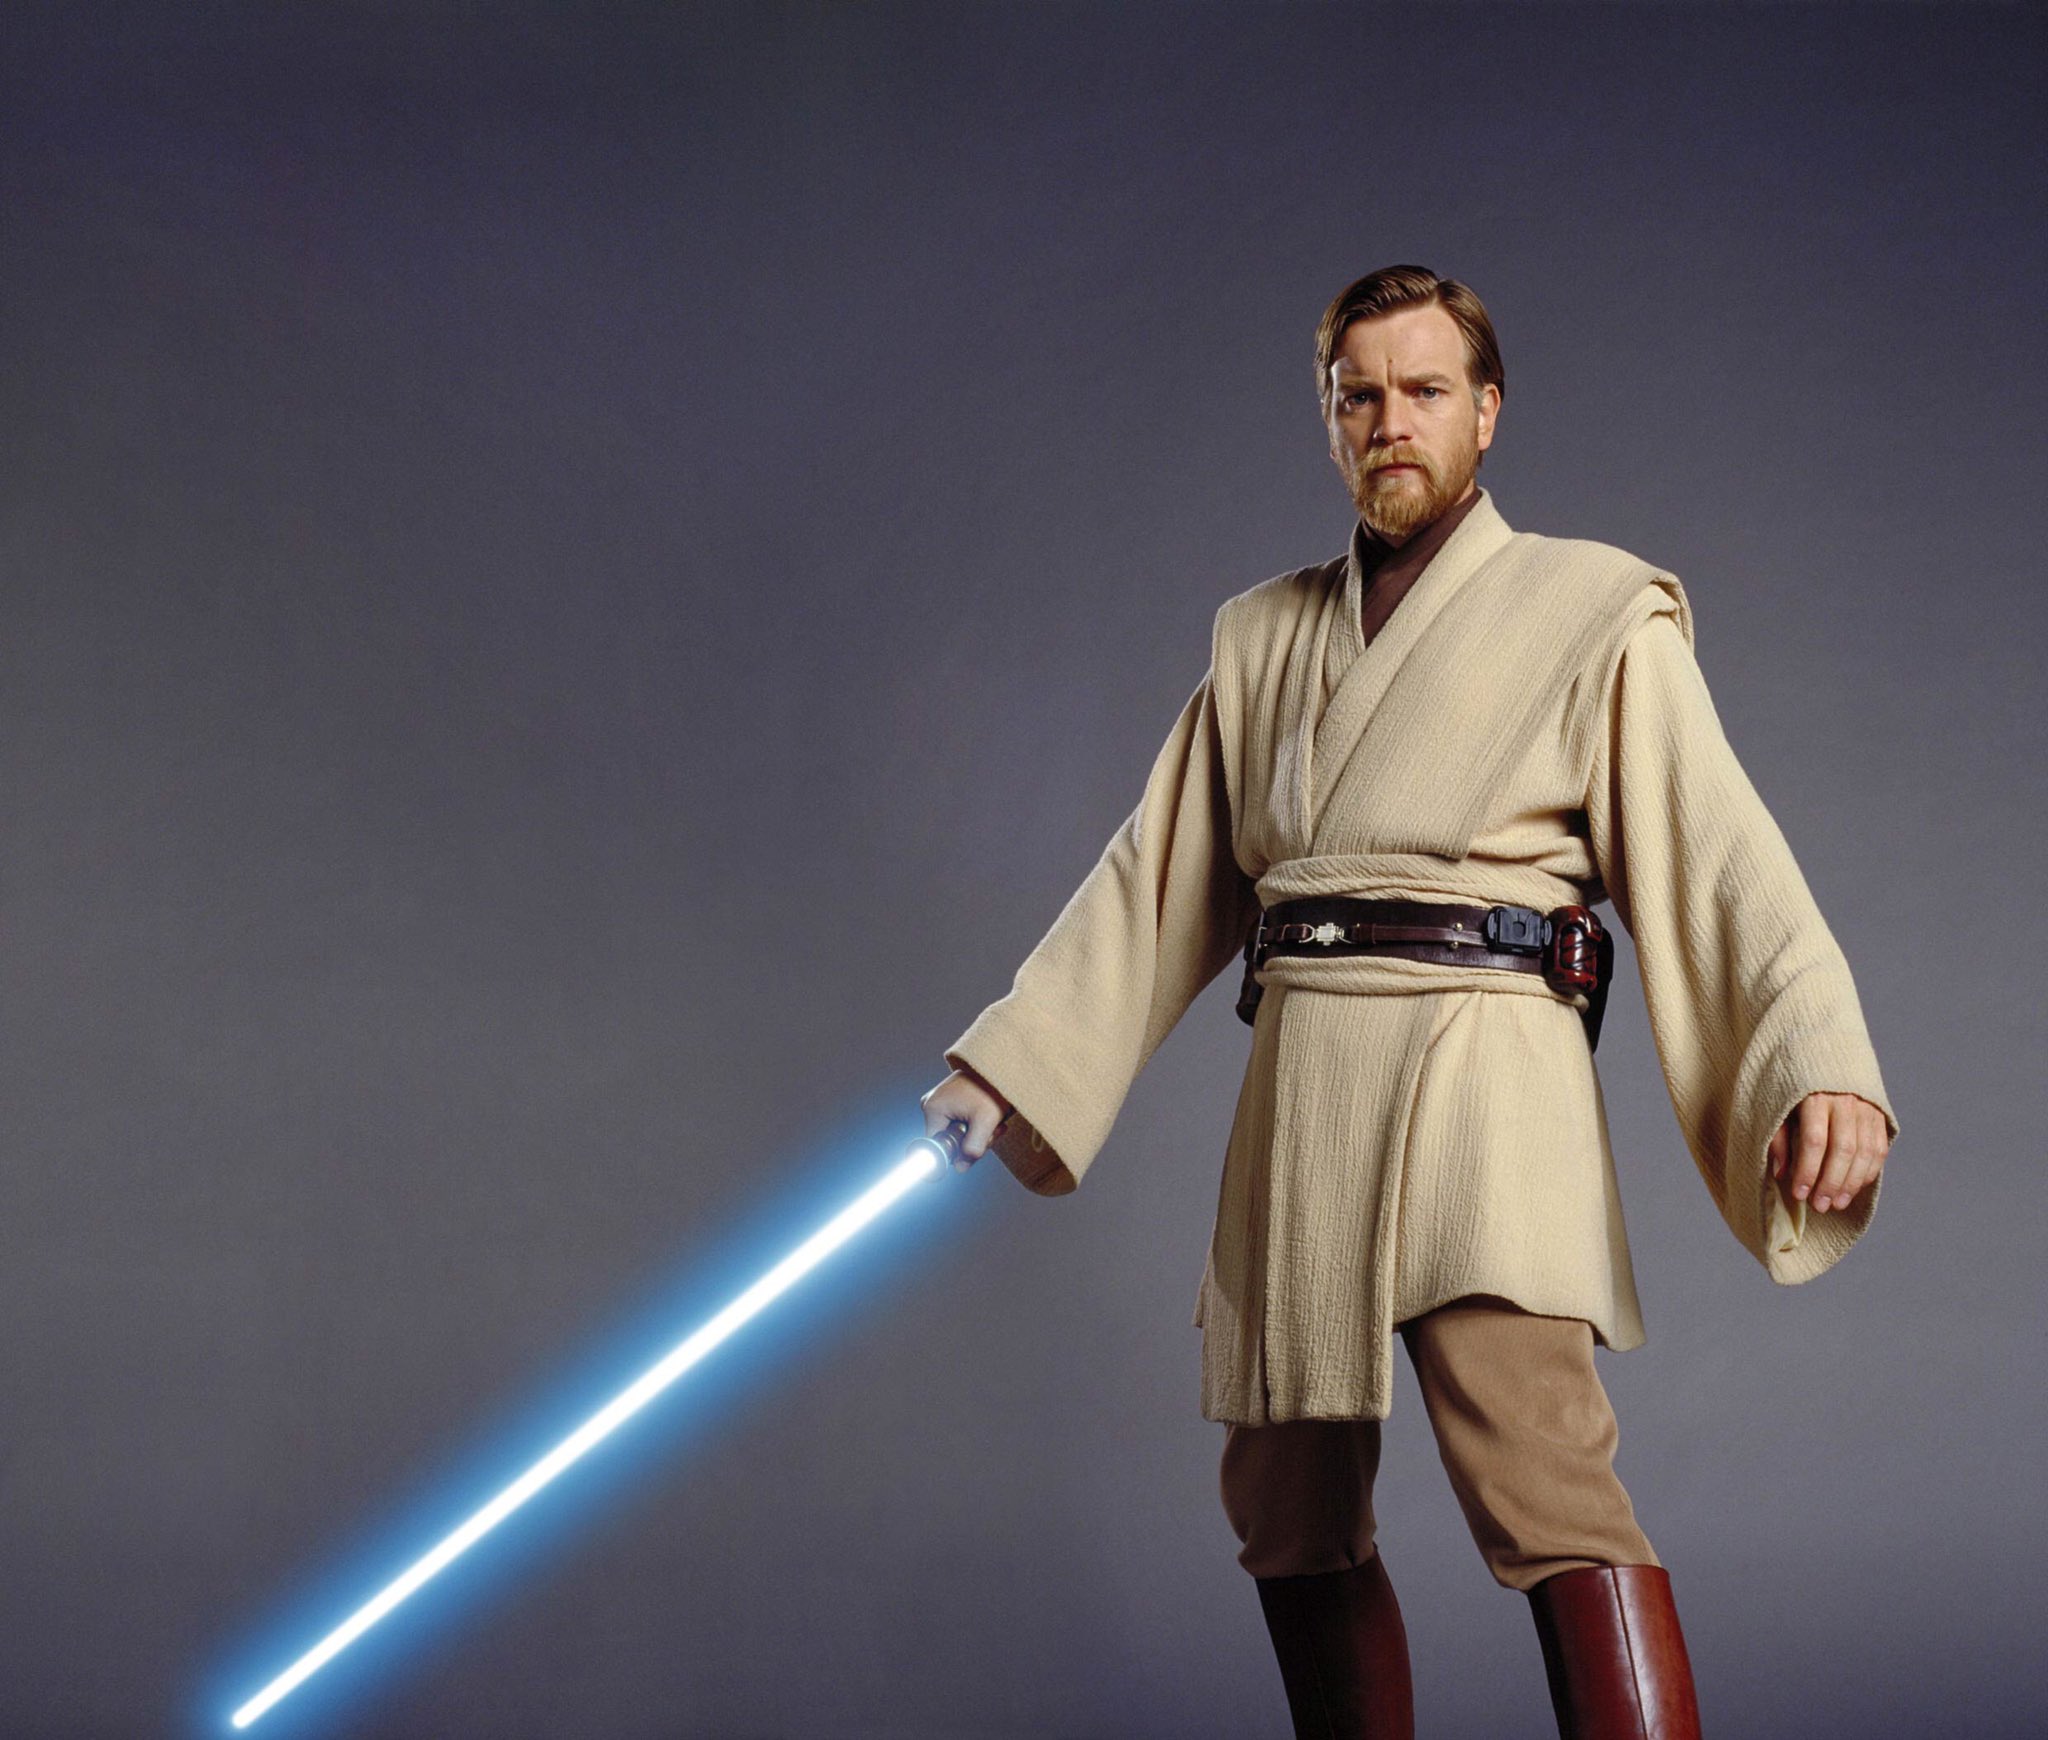 I can t believe I missed this but happy late birthday to THE MAN HIMSELF Mr. Ewan Mcgregor! 